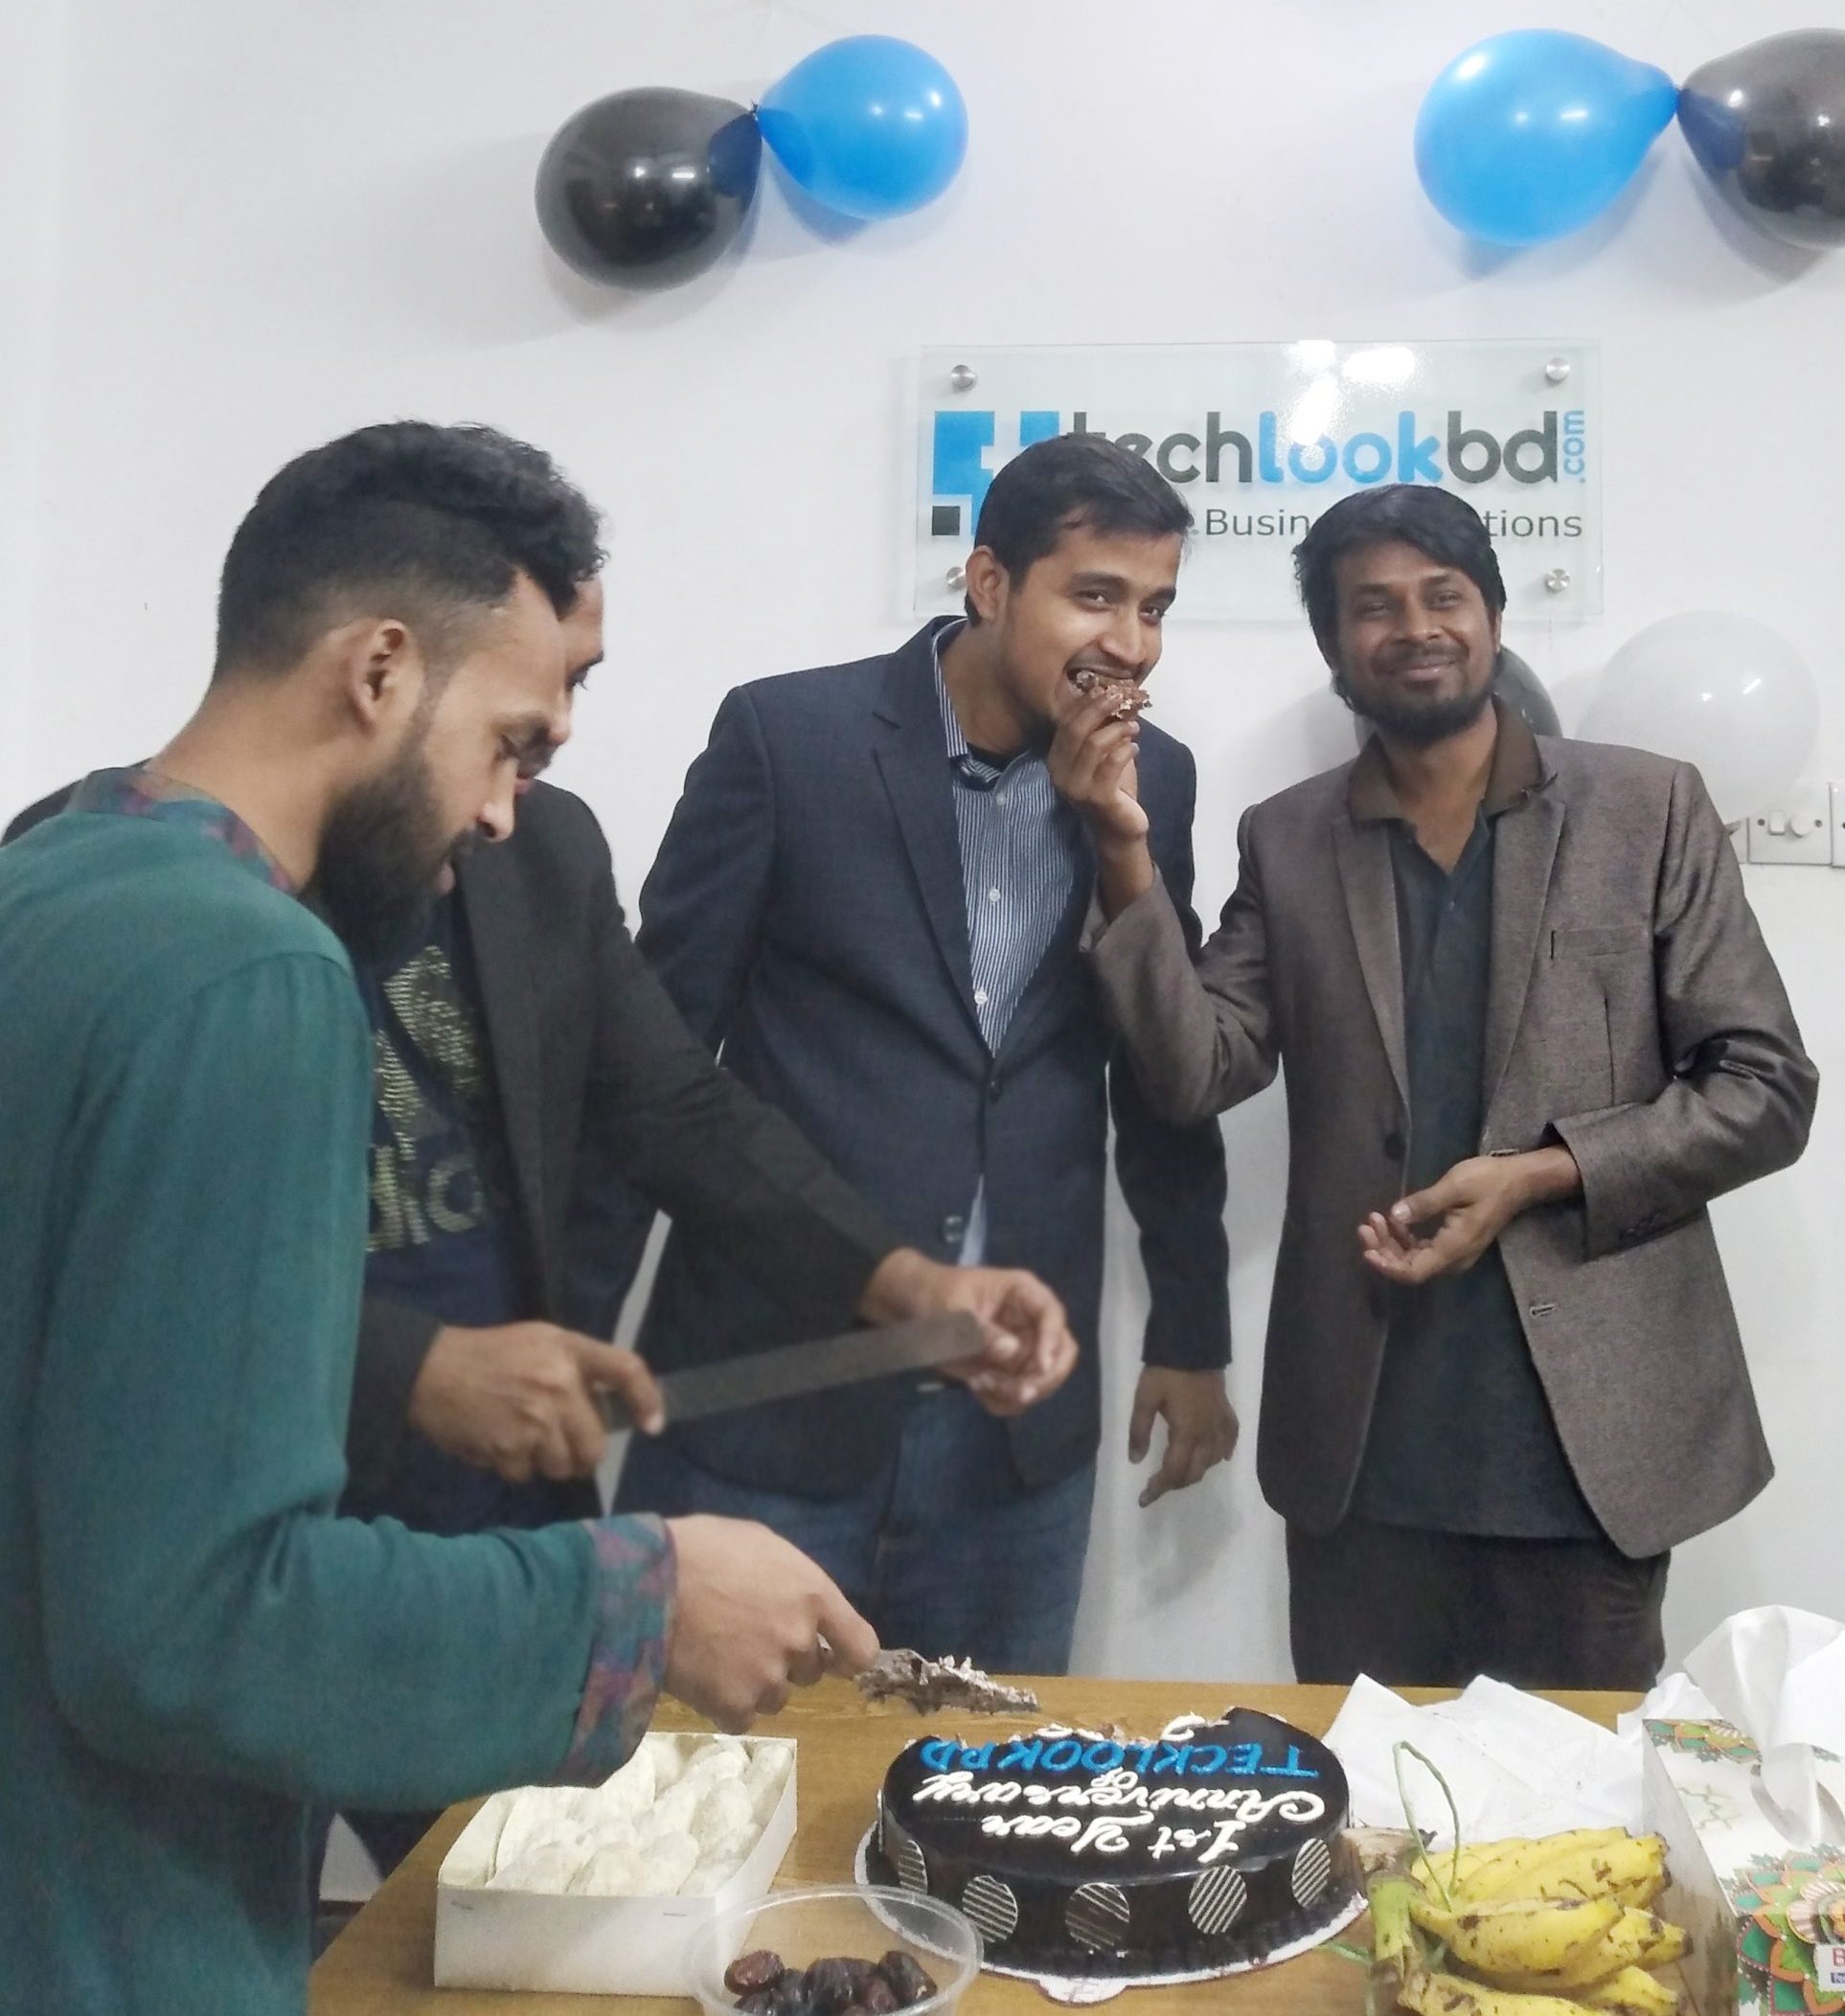 TechLookBD 1st Year Anniversary - Employees and guests enjoyed the festivities